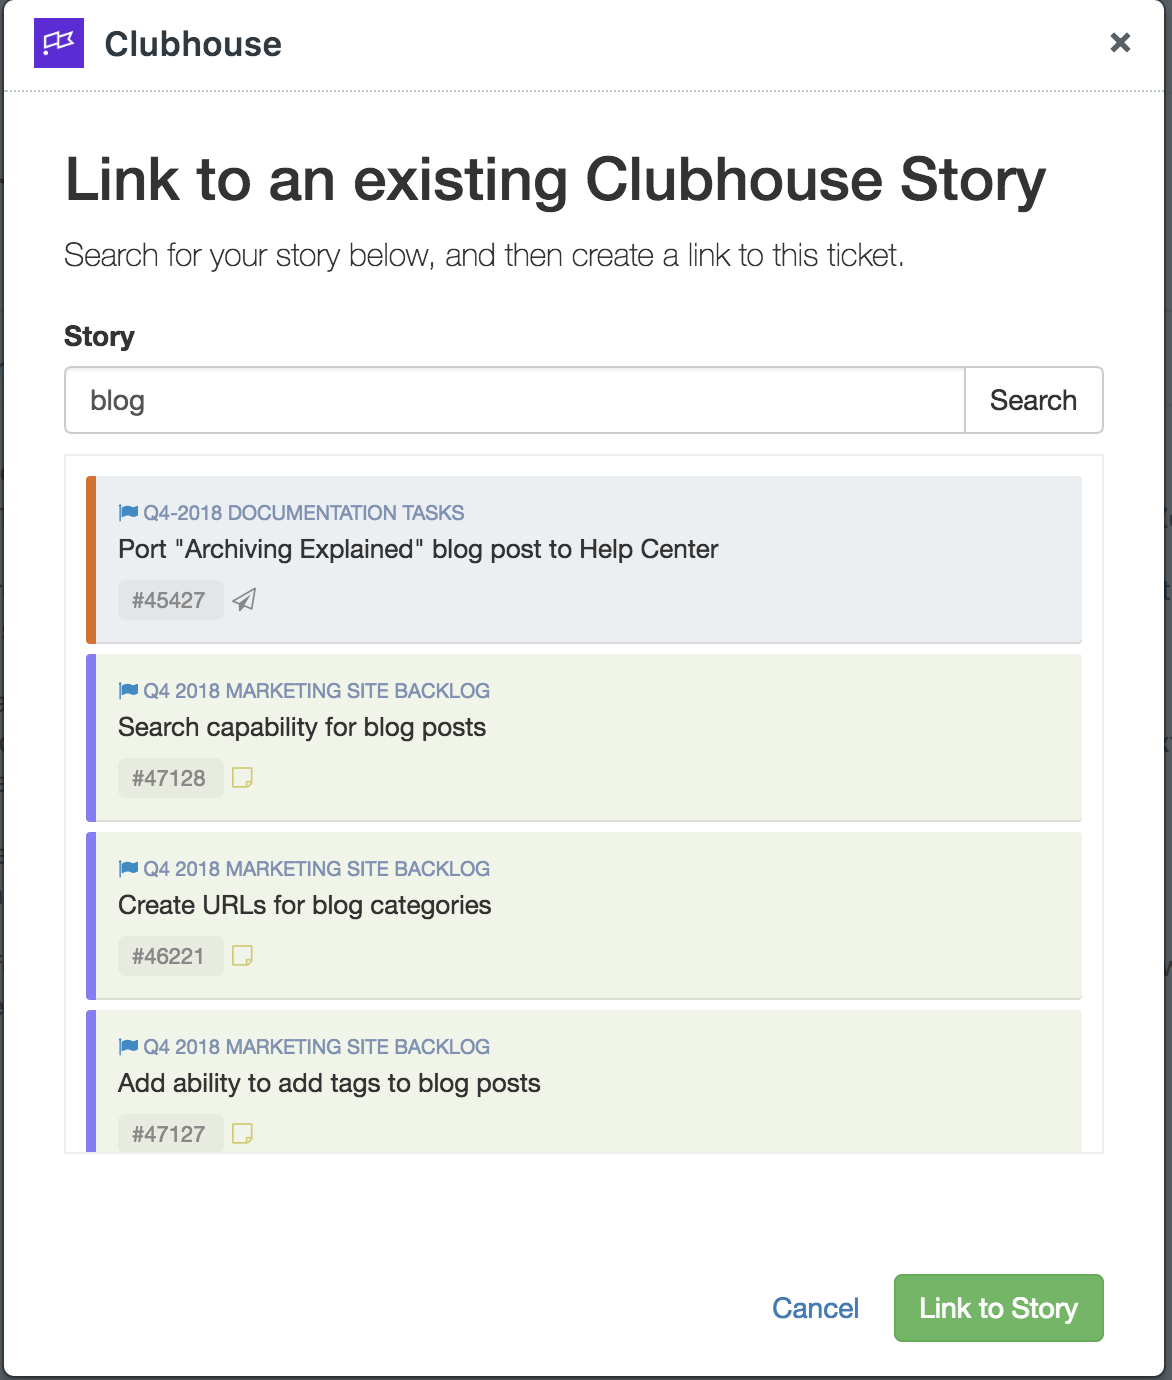 Clubhouse_ZenDesk_Link_to_Existing_Story.png